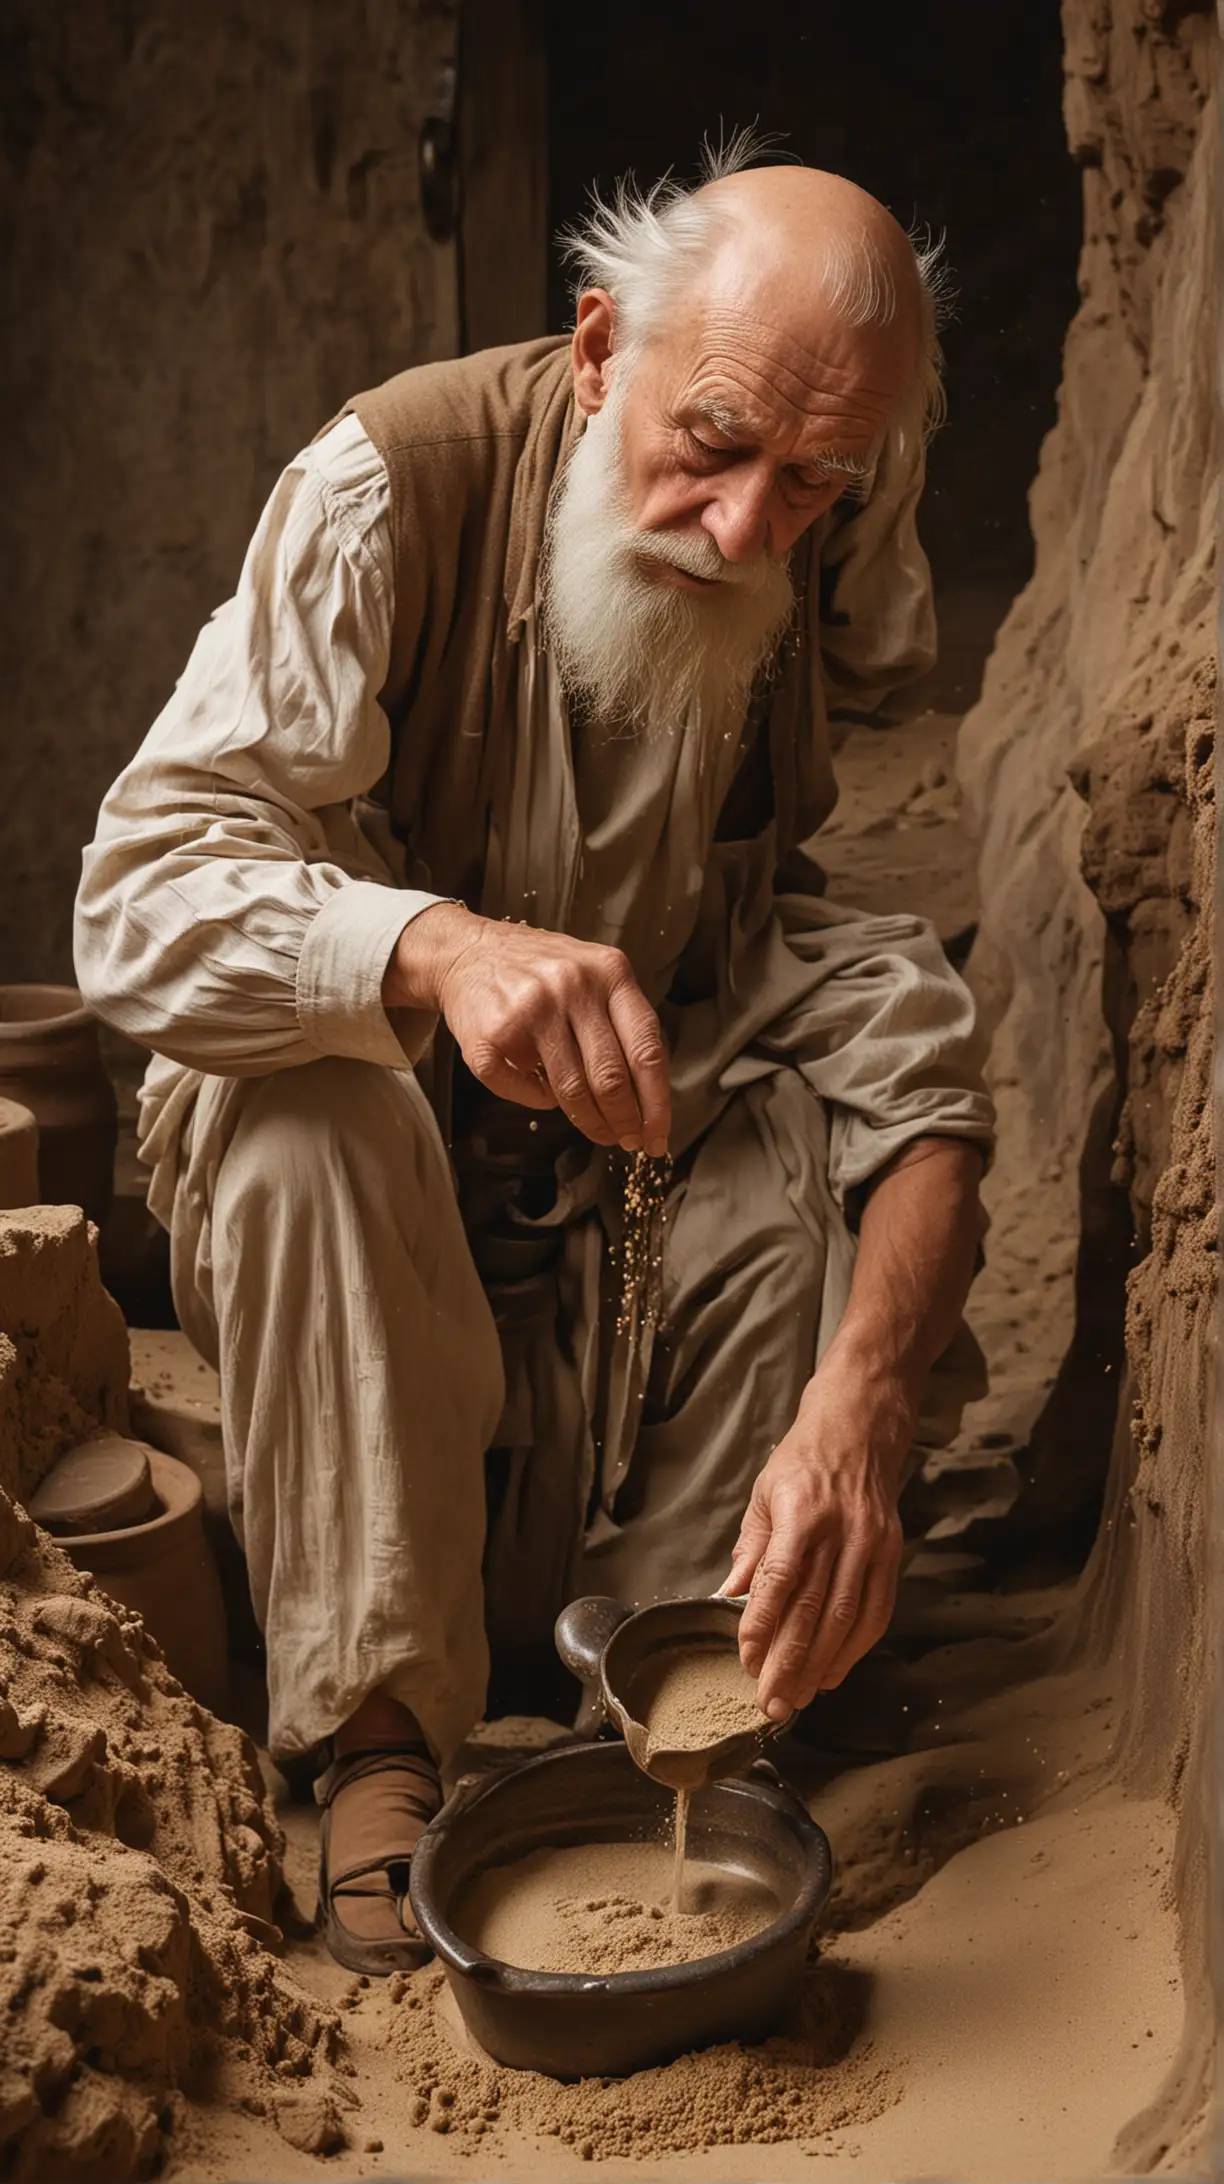 A wise old man pours fine sand into a jug full to the brim, the sand falls through his fingers